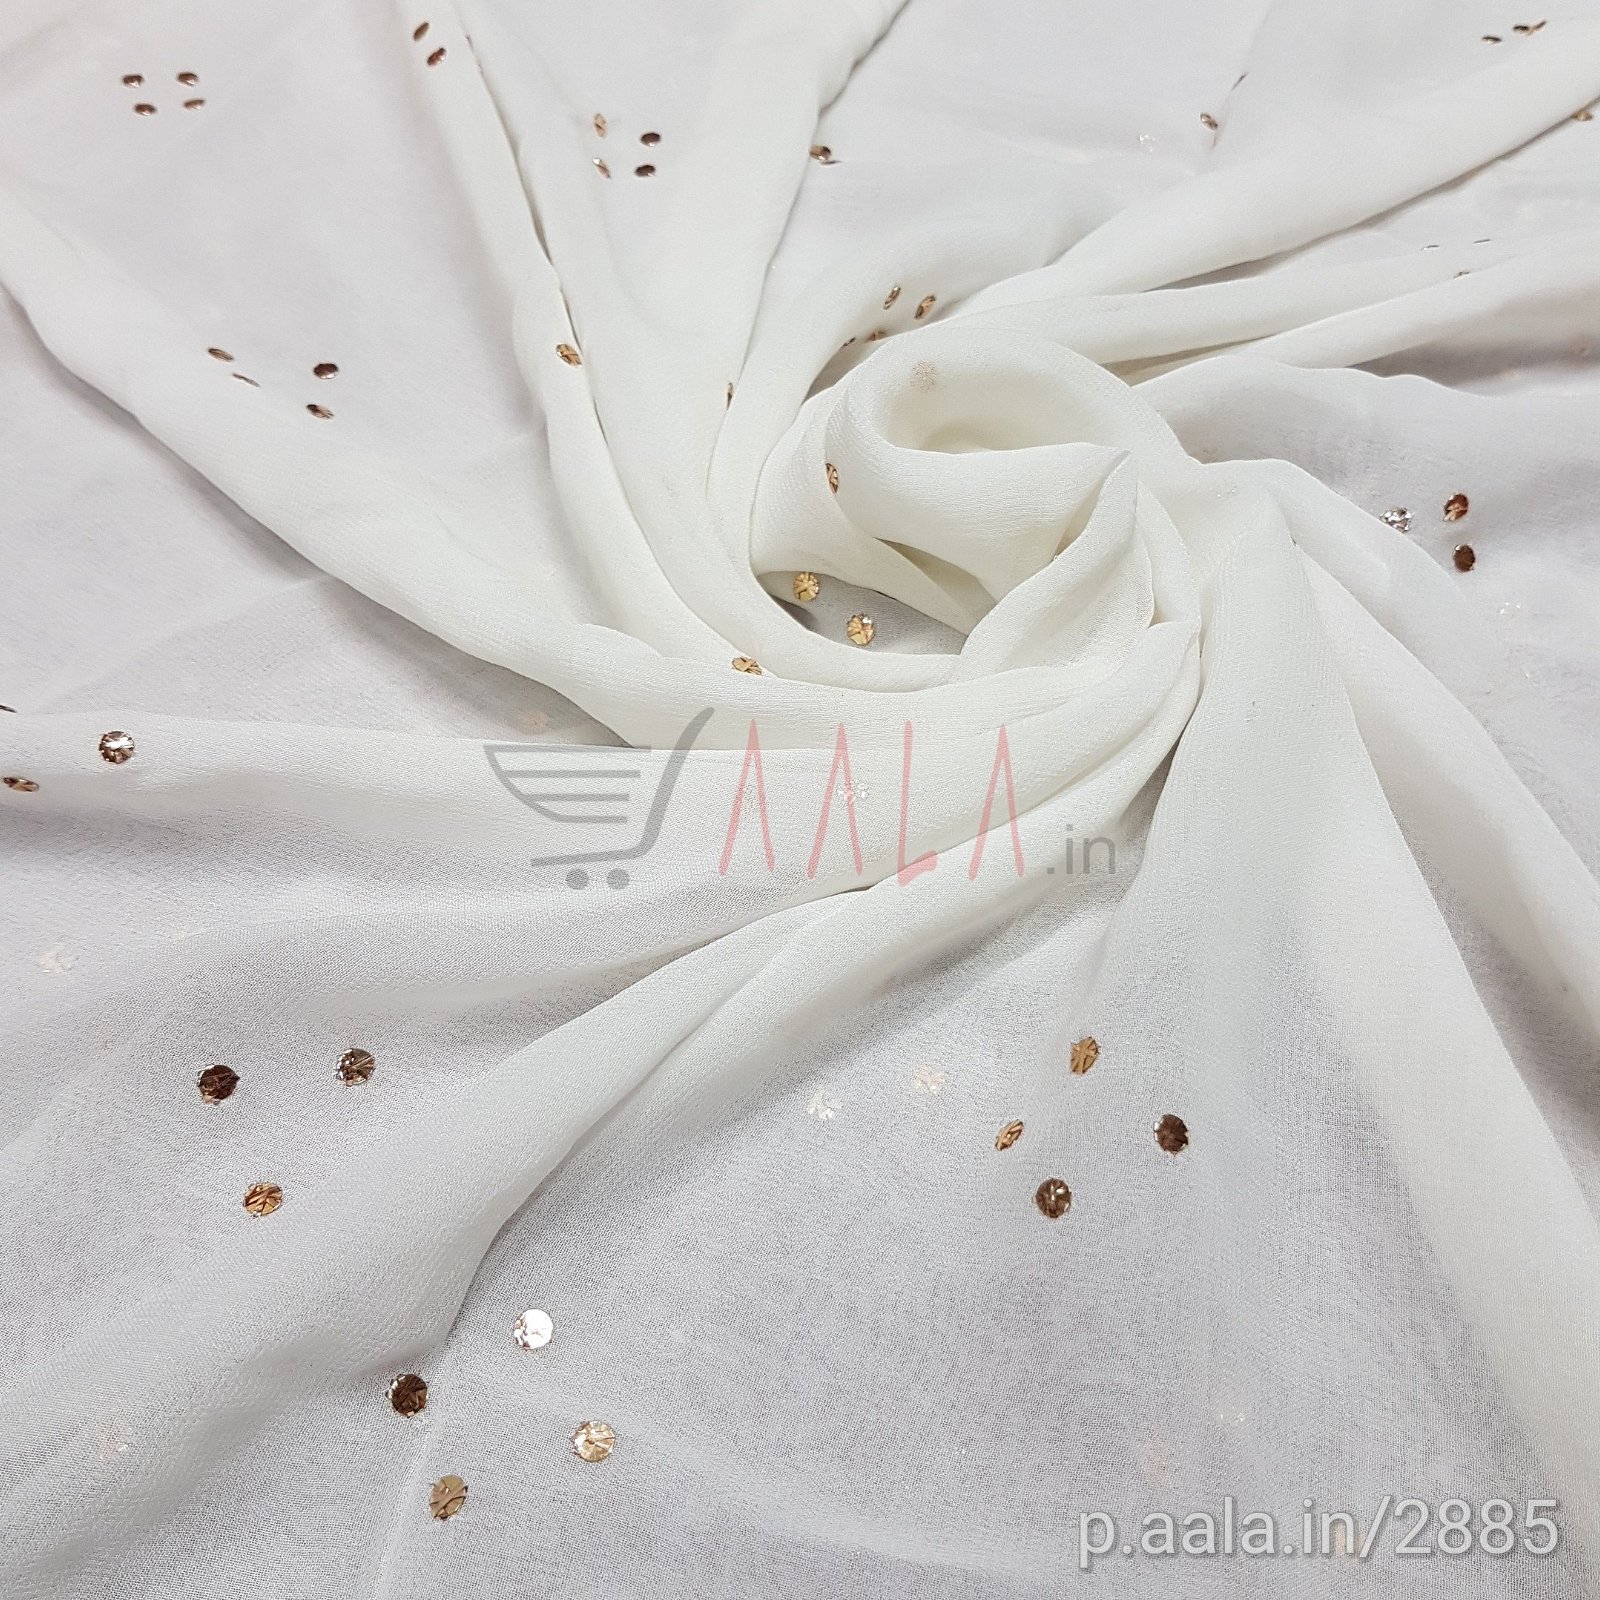 Mukaish Lite Gold Georgette Viscose 44 Inches Dyeable 2.50 Metres #2885